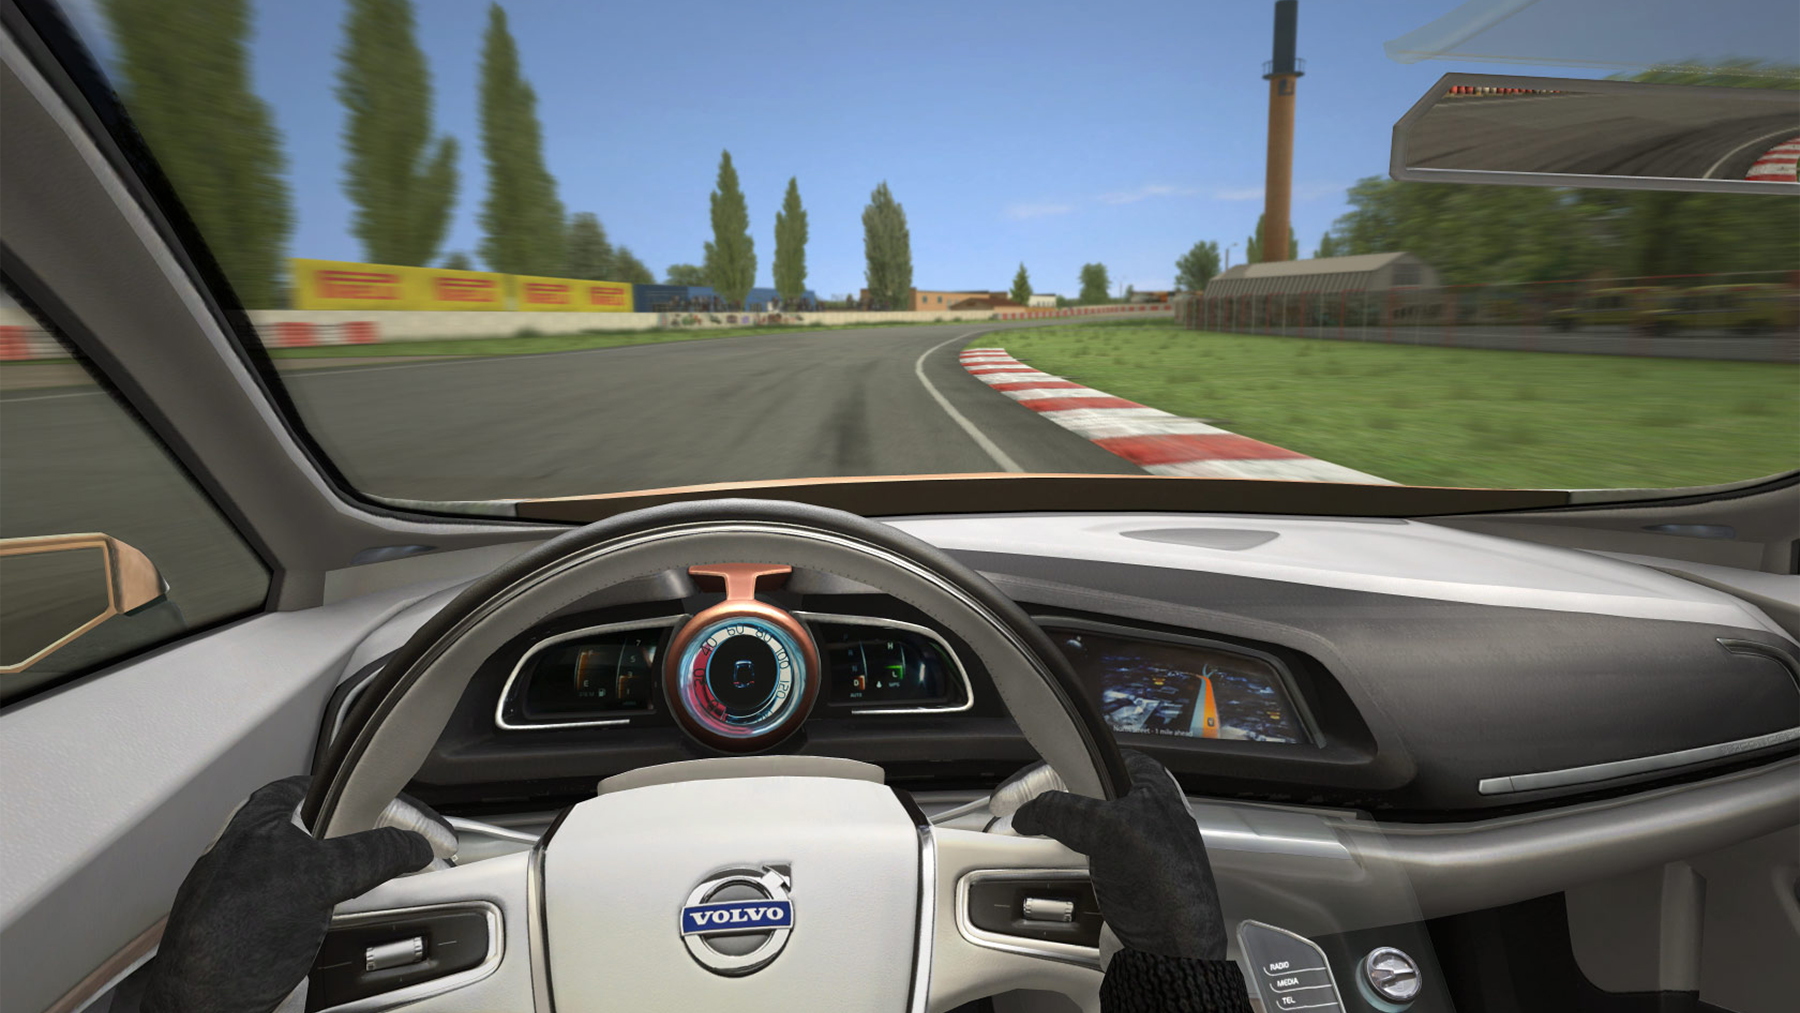 Car driving mobile. City car Driving Volvo s60r. Volvo the game. Volvo в играх. Volvo s60 game.